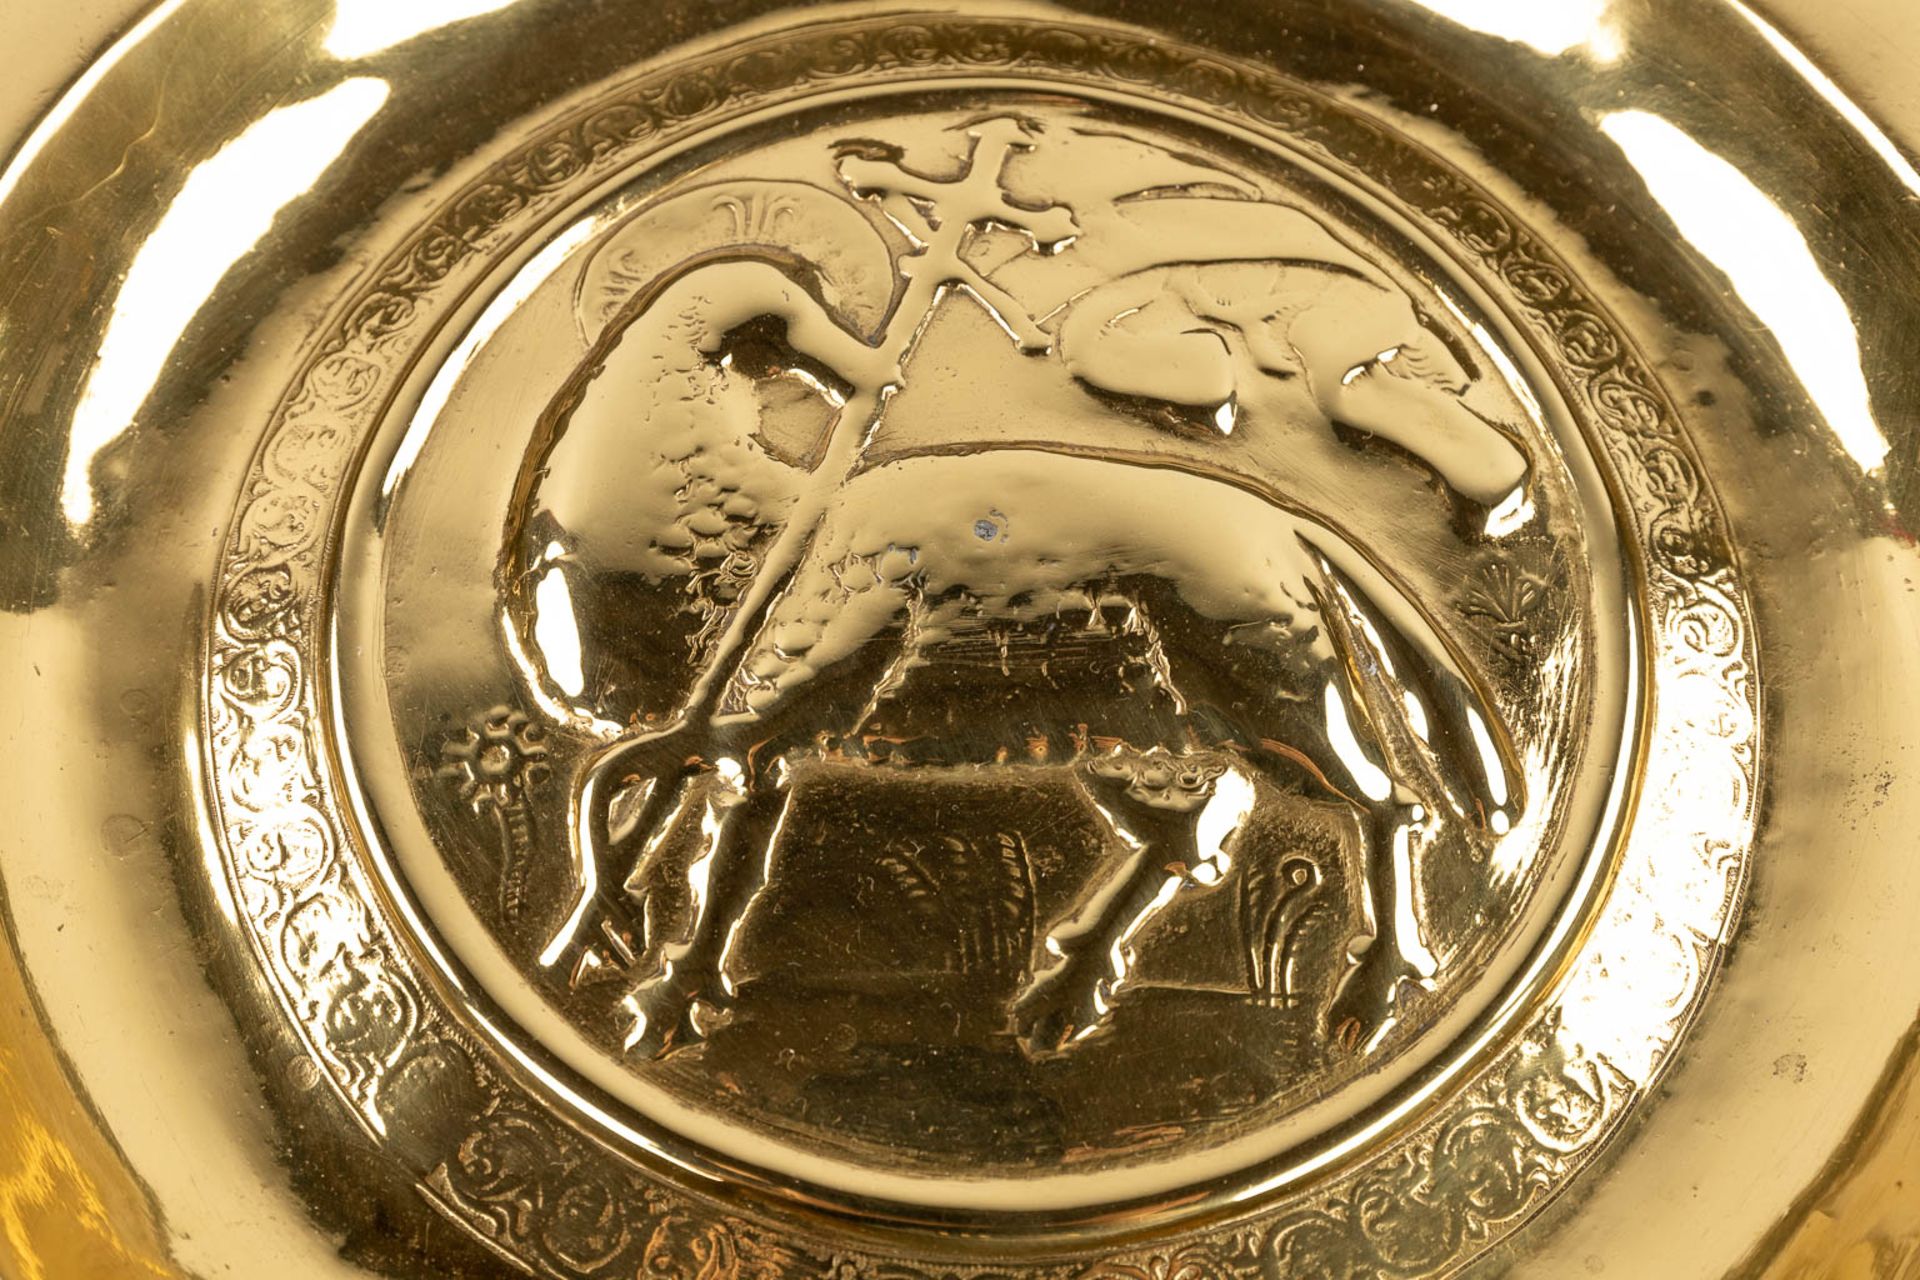 A large baptism bowl, Brass, images of the Holy Lamb. 16th/17th C. (H: 3,7 x D: 37 cm) - Image 3 of 12